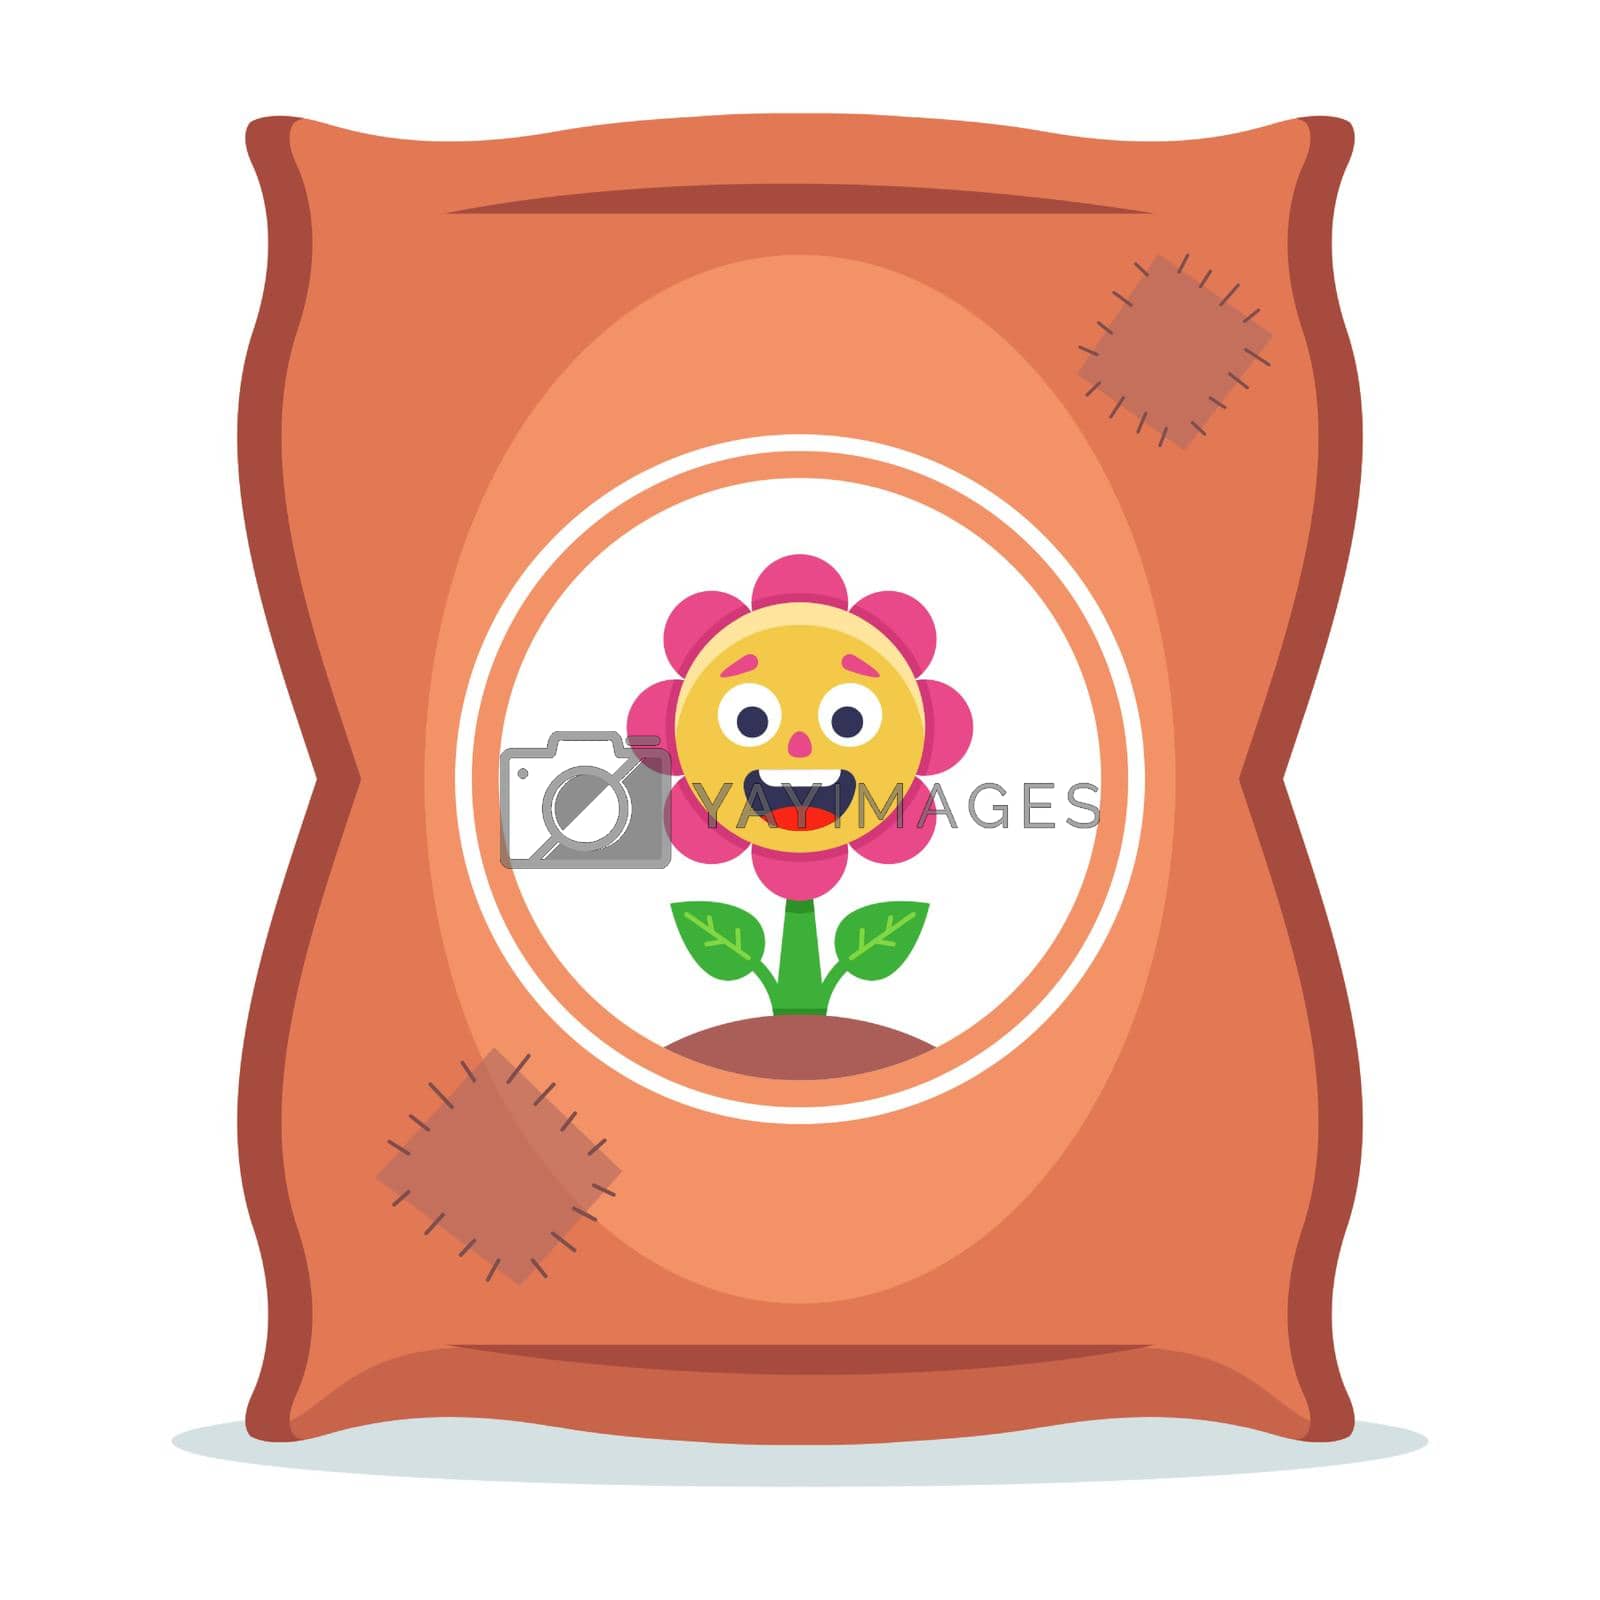 Royalty free image of a bag of plant fertilizers. by PlutusART